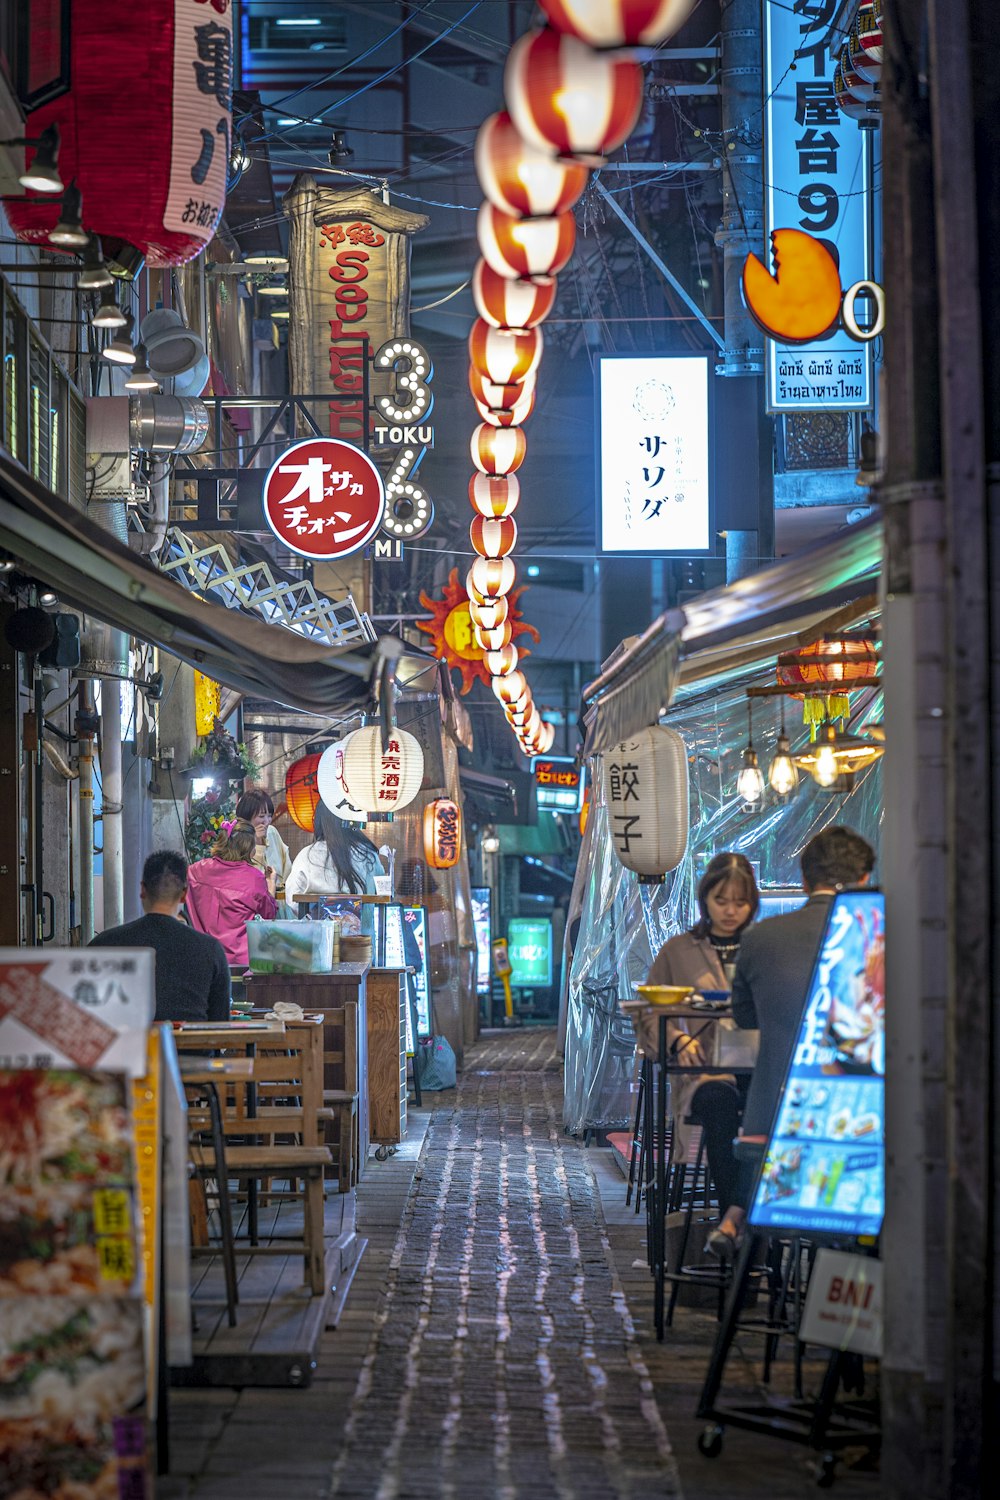 a narrow alley way with people sitting at tables